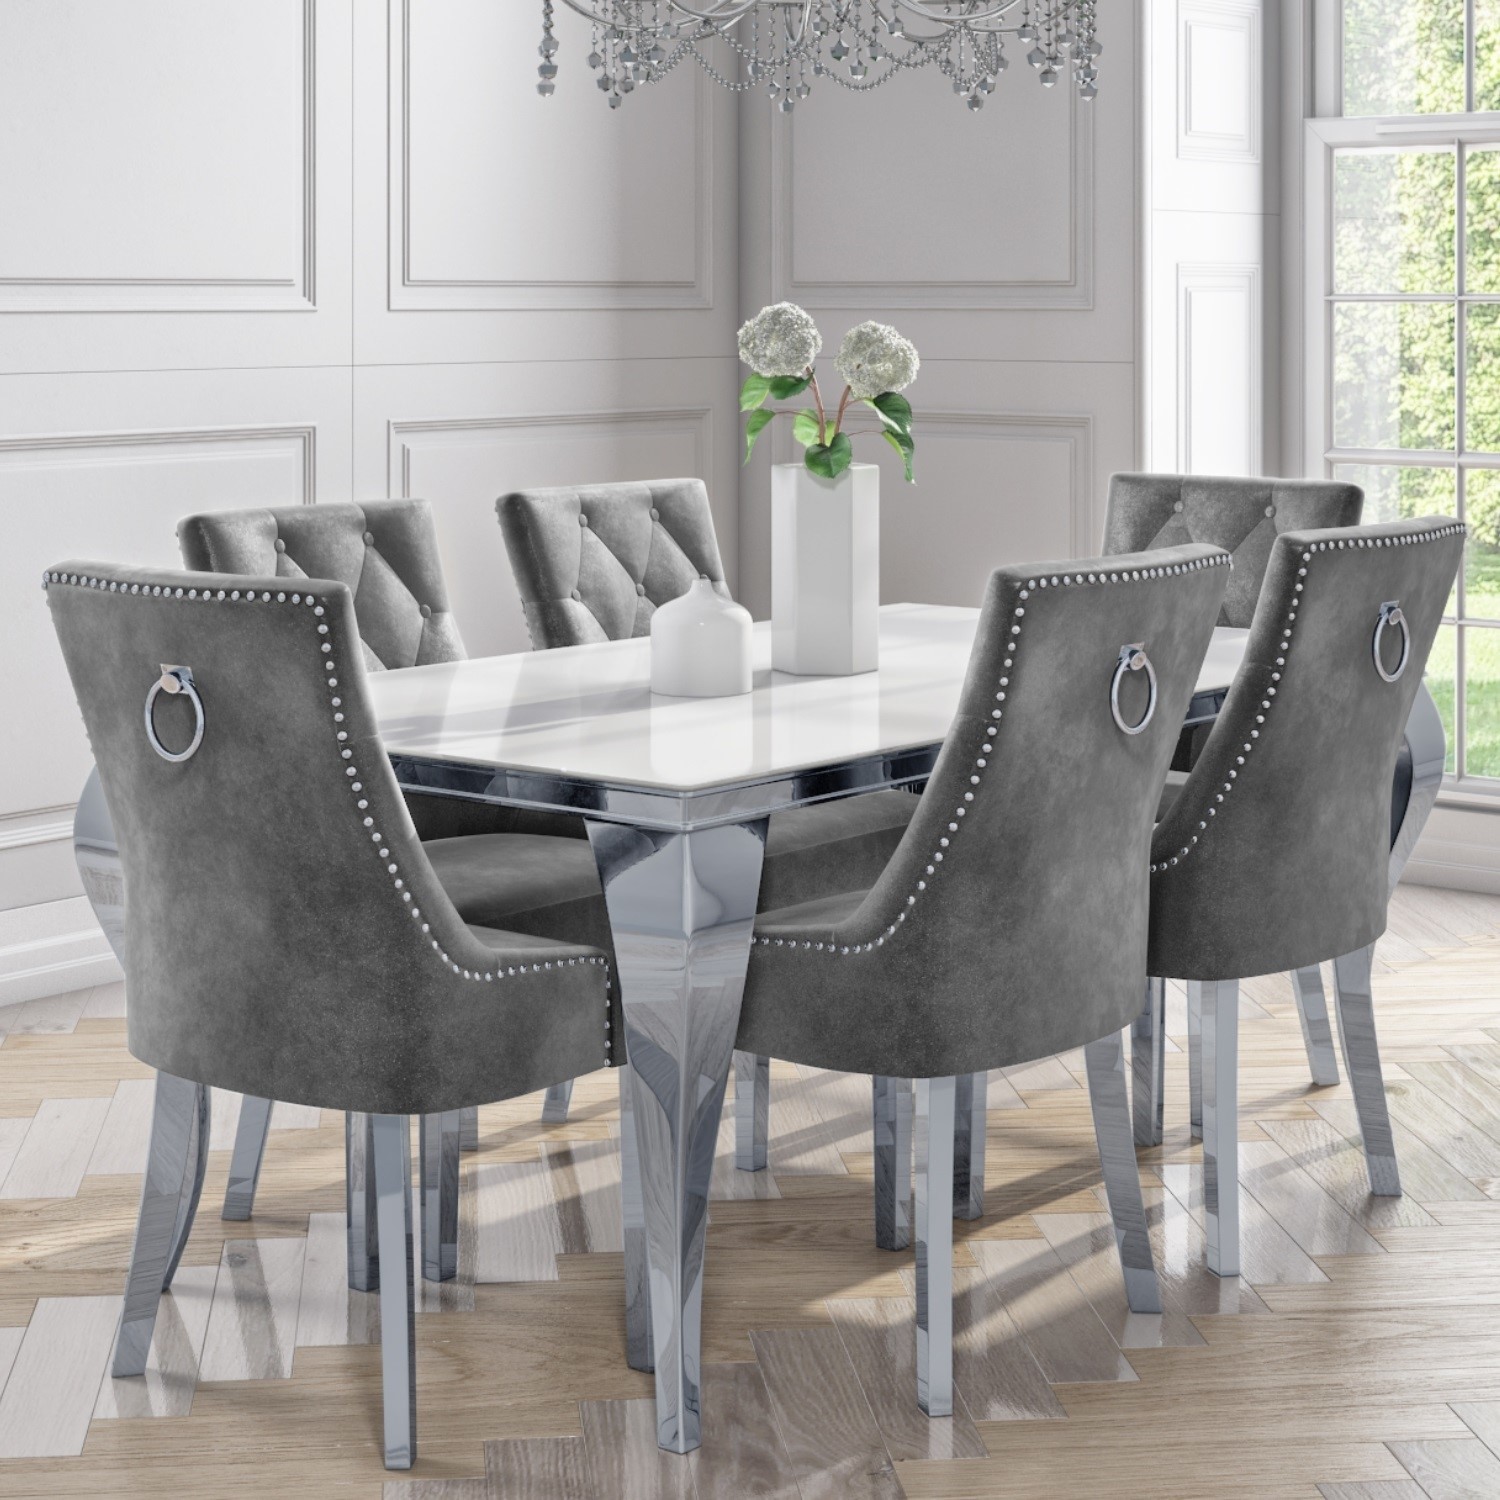 White And Mirrored Dining Table With 6, Six Chair Dining Table Dimensions